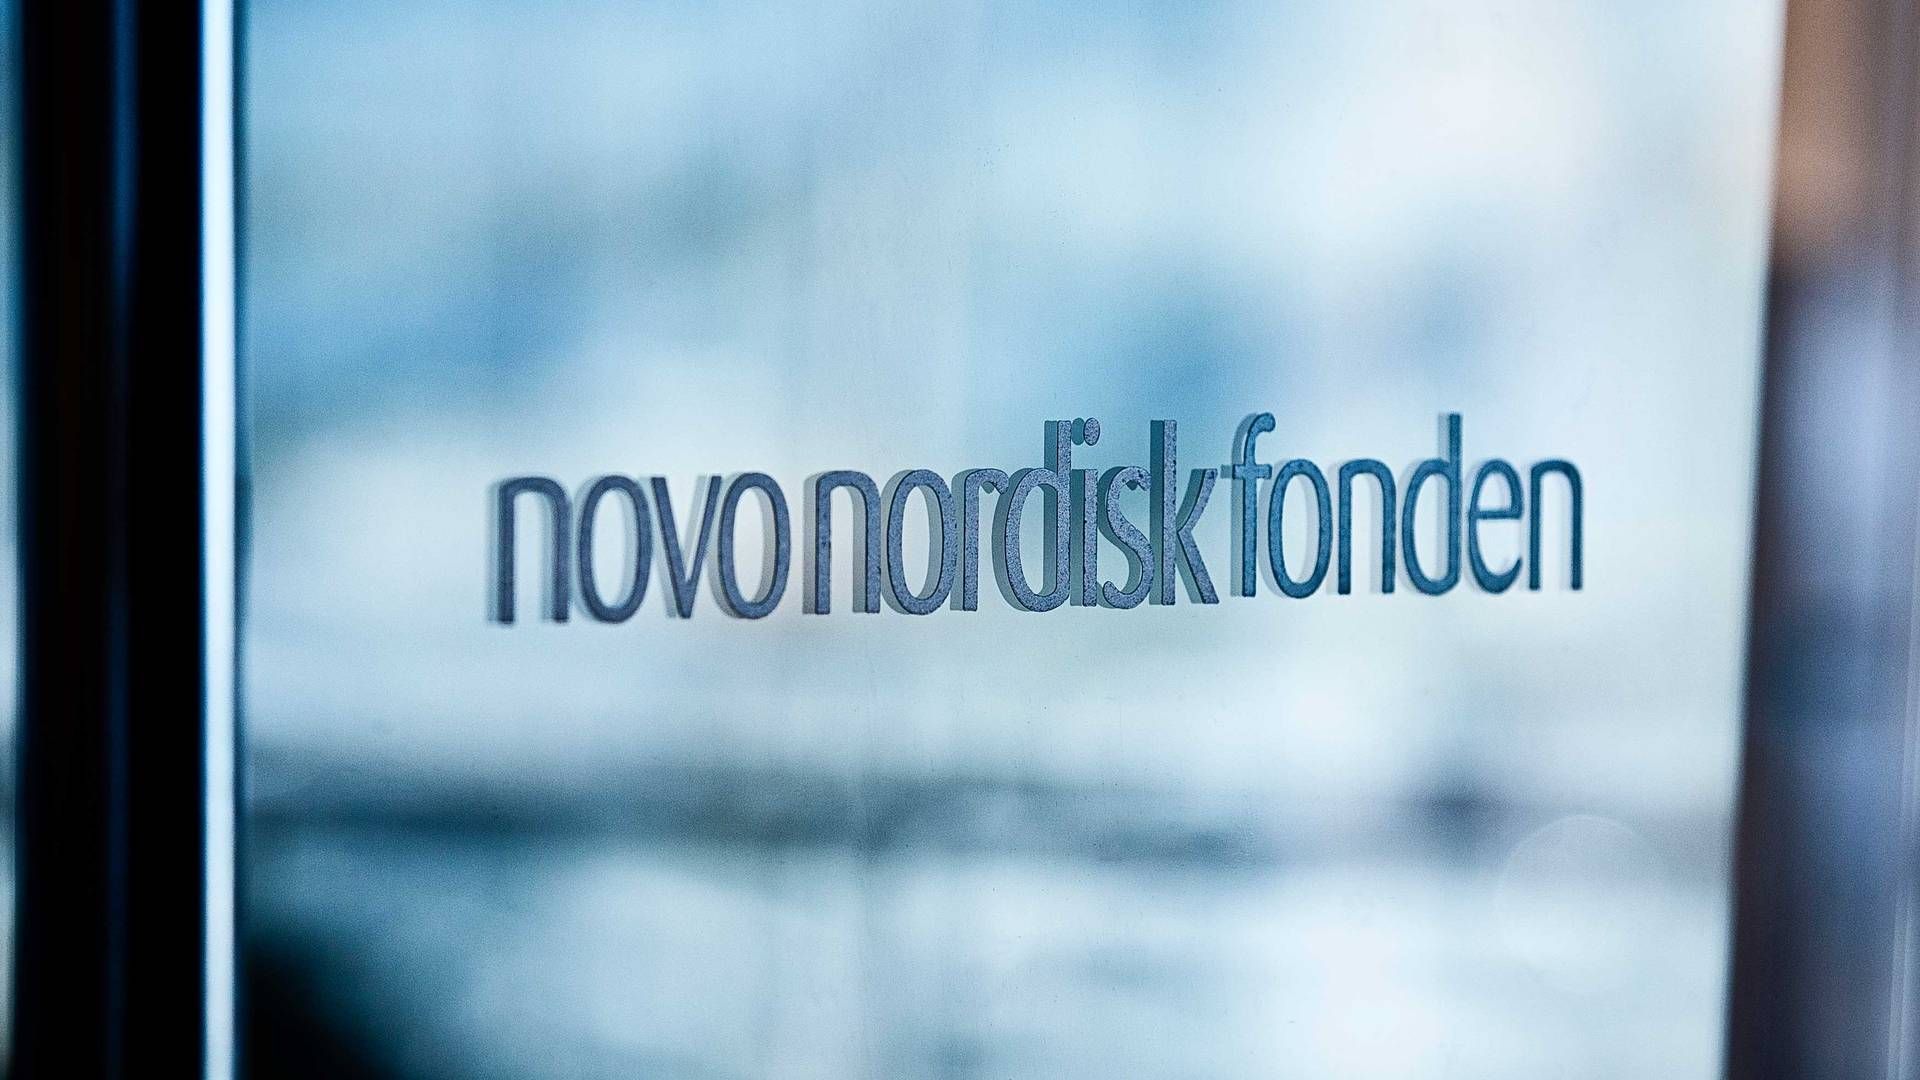 Researchers fear losing support for their research if making any critical statement about the Novo Nordisk Foundation | Photo: Novo Nordisk Fonden / Pr